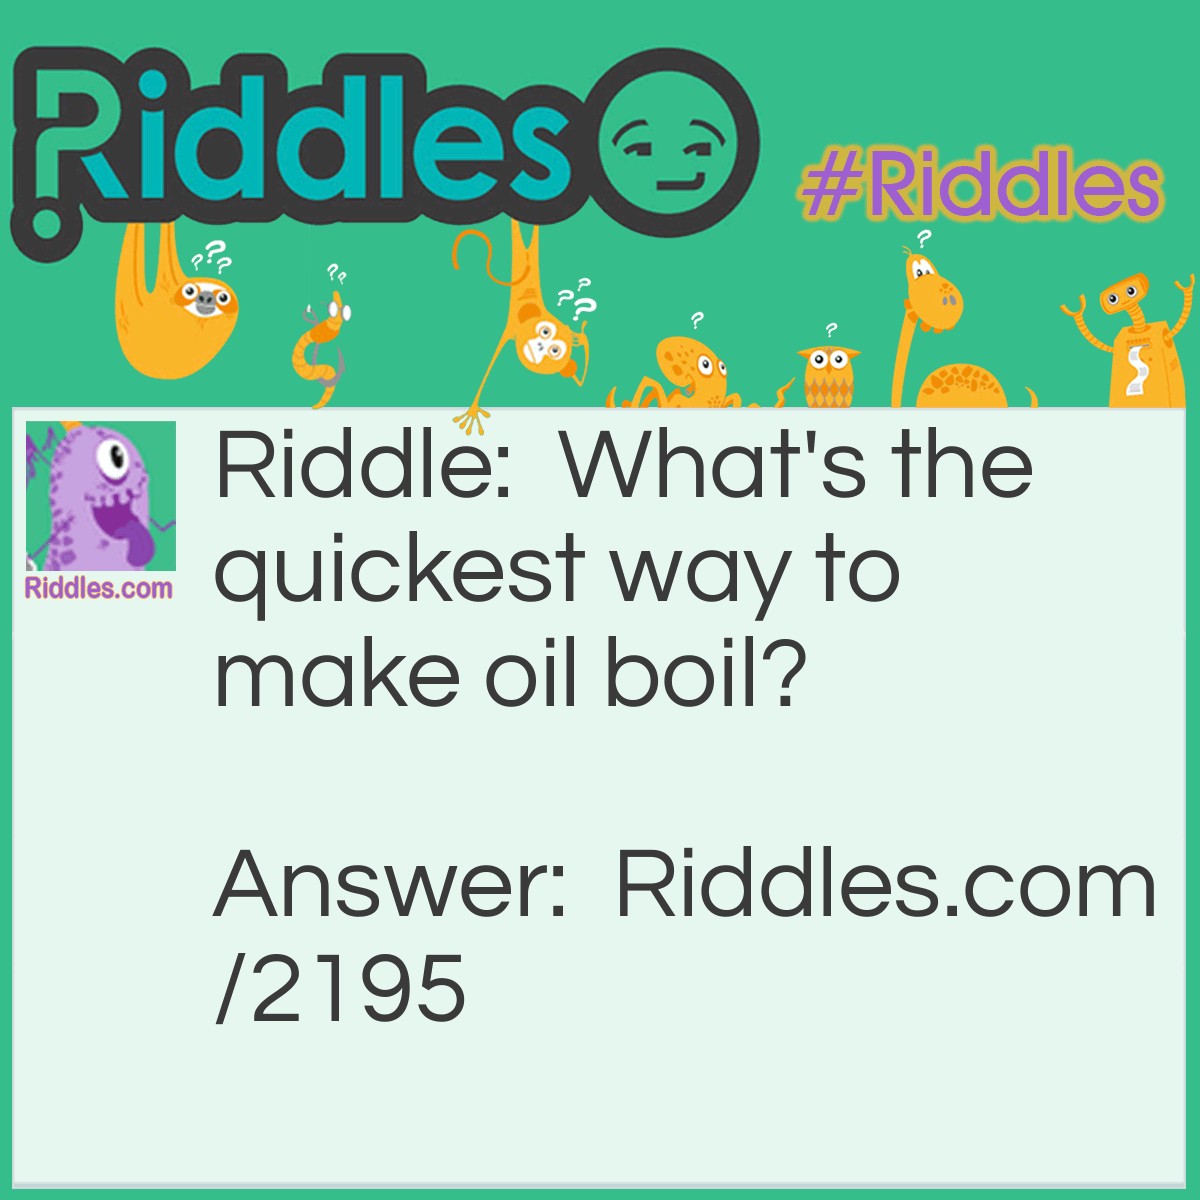 Riddle: What's the quickest way to make oil boil? Answer: Add the letter "B."